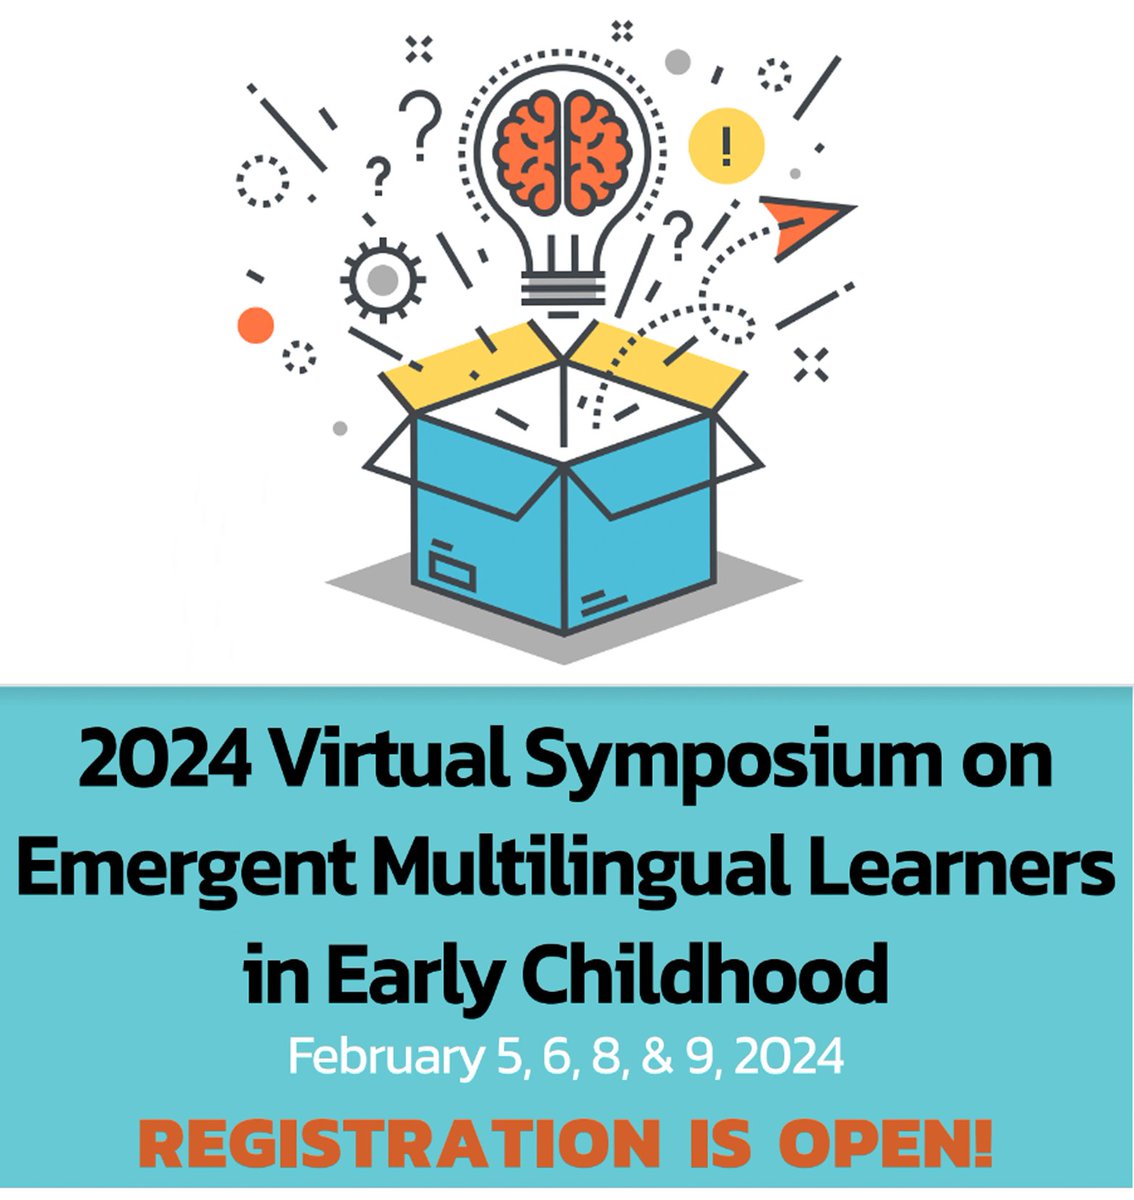 Free symposium! Educators, policymakers & practitioners are invited to this free virtual professional learning experience on Emergent Multilingual Learners in Early Childhood (Pre-K - 3rd). For more info & to register: ocmbocesiss.org/event/SEML_24 @MidStateRBERN #EmpoweringAllLearners